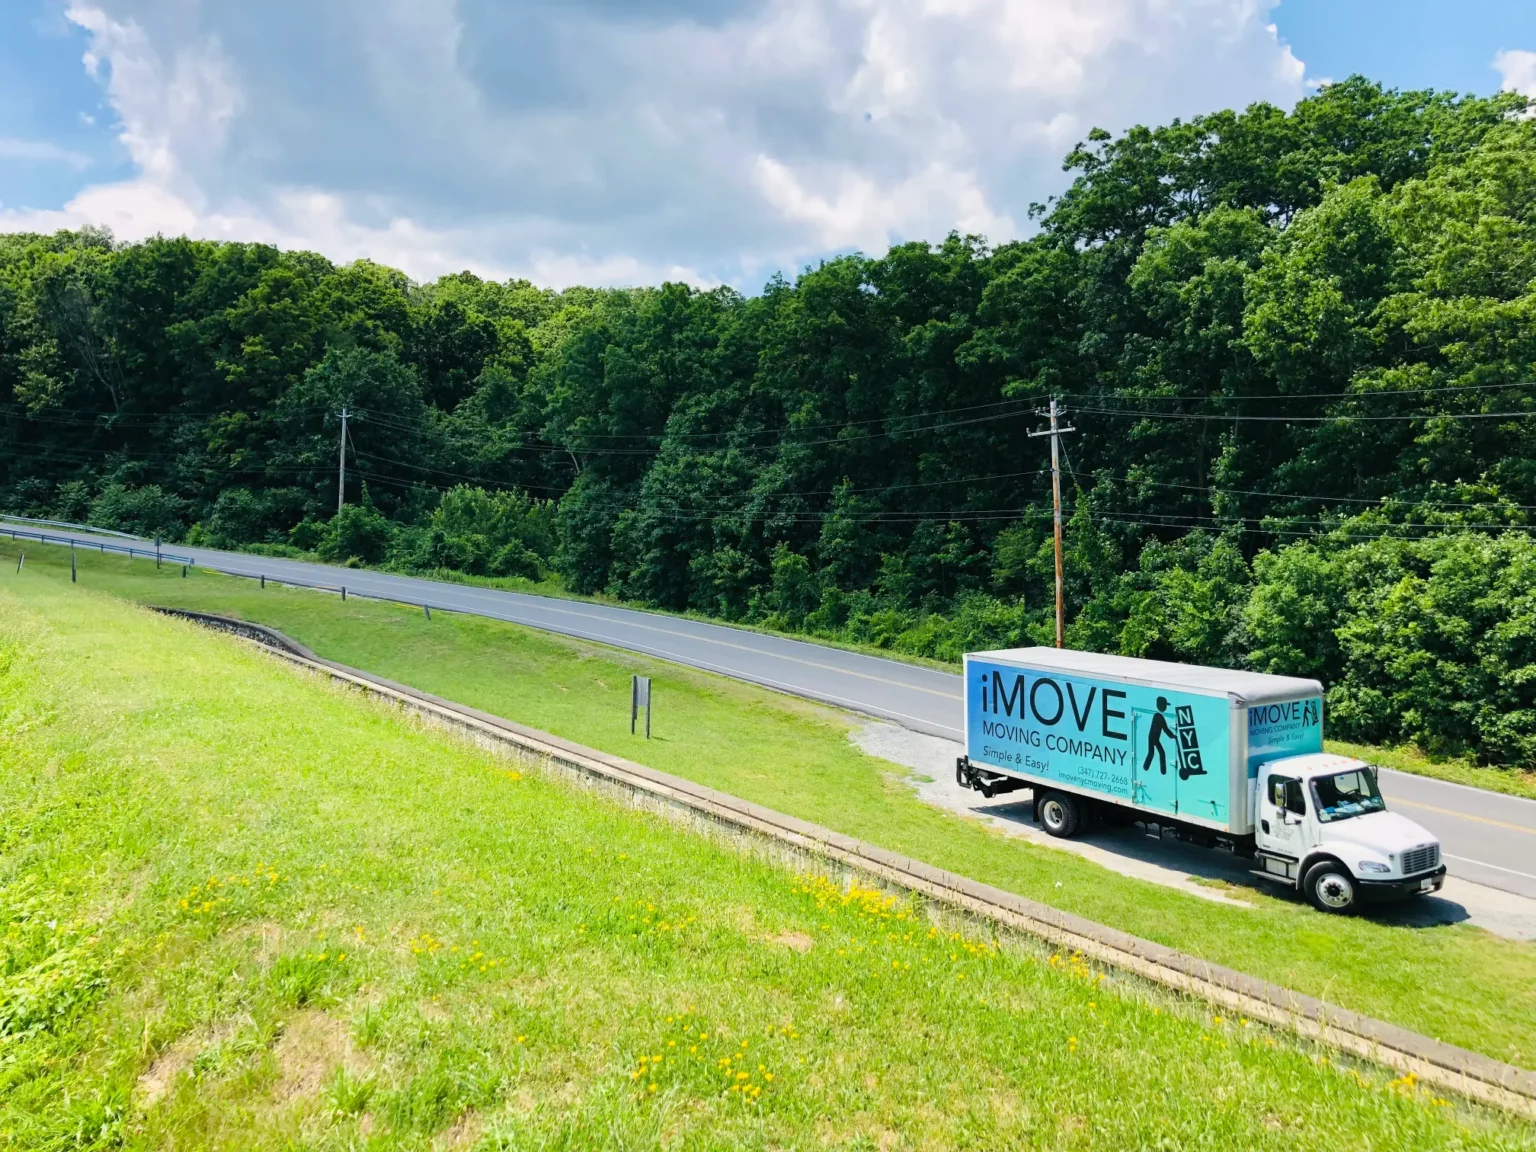 iMOVE NYC Truck Parked By The Side Of The Road With Forrest Behind